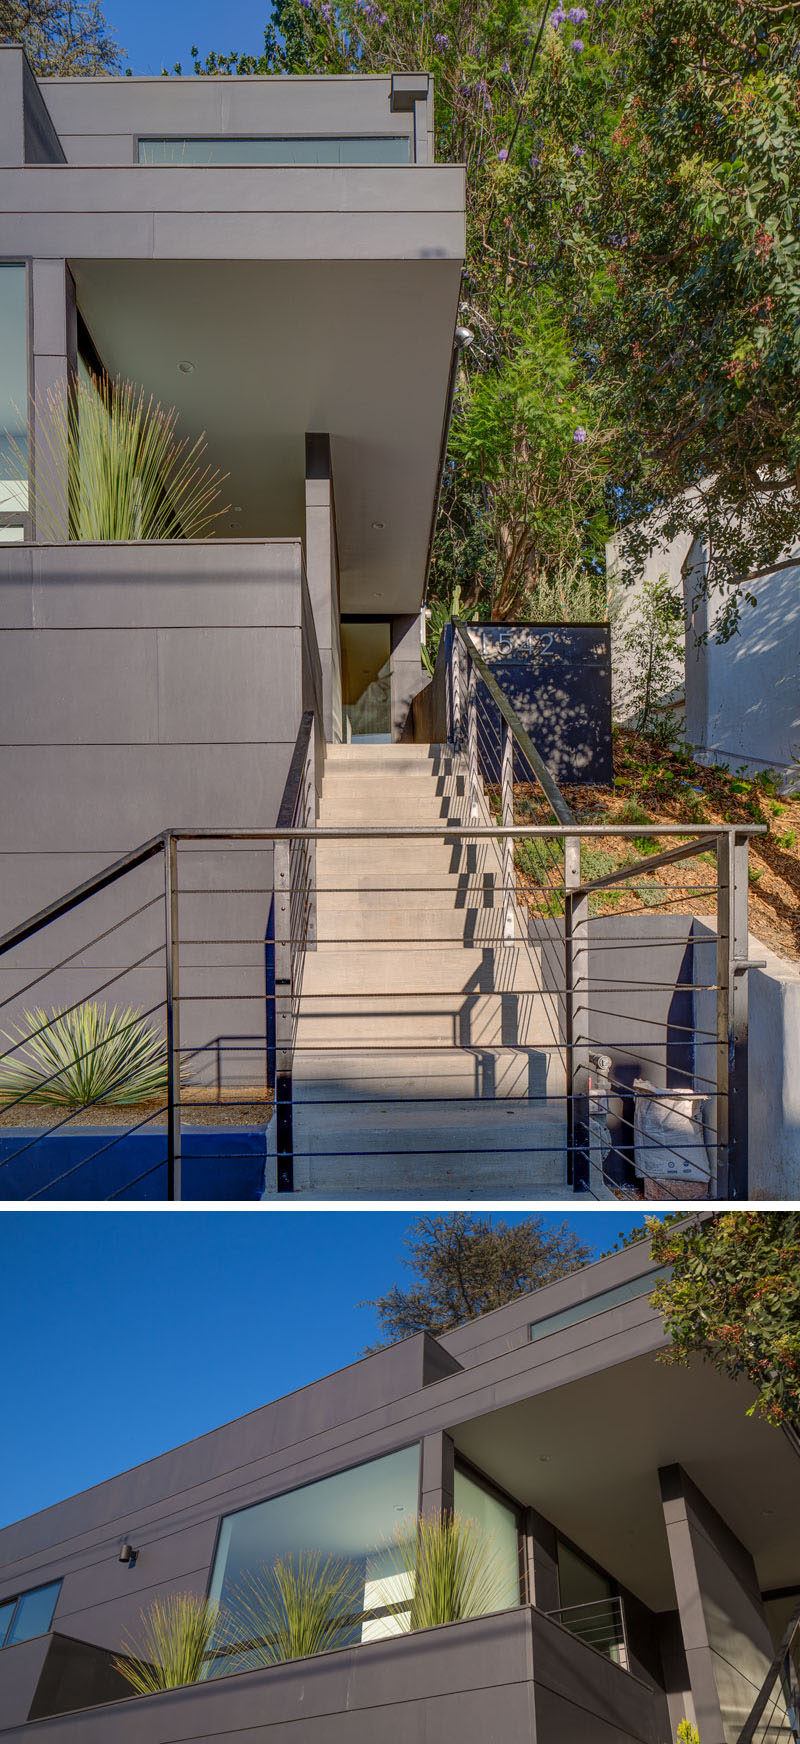 This modern house has concrete stairs with a minimalist black handrail lead up to a small covered deck that provides protection from the elements and access to the front door. #ExteriorStairs #Architecture